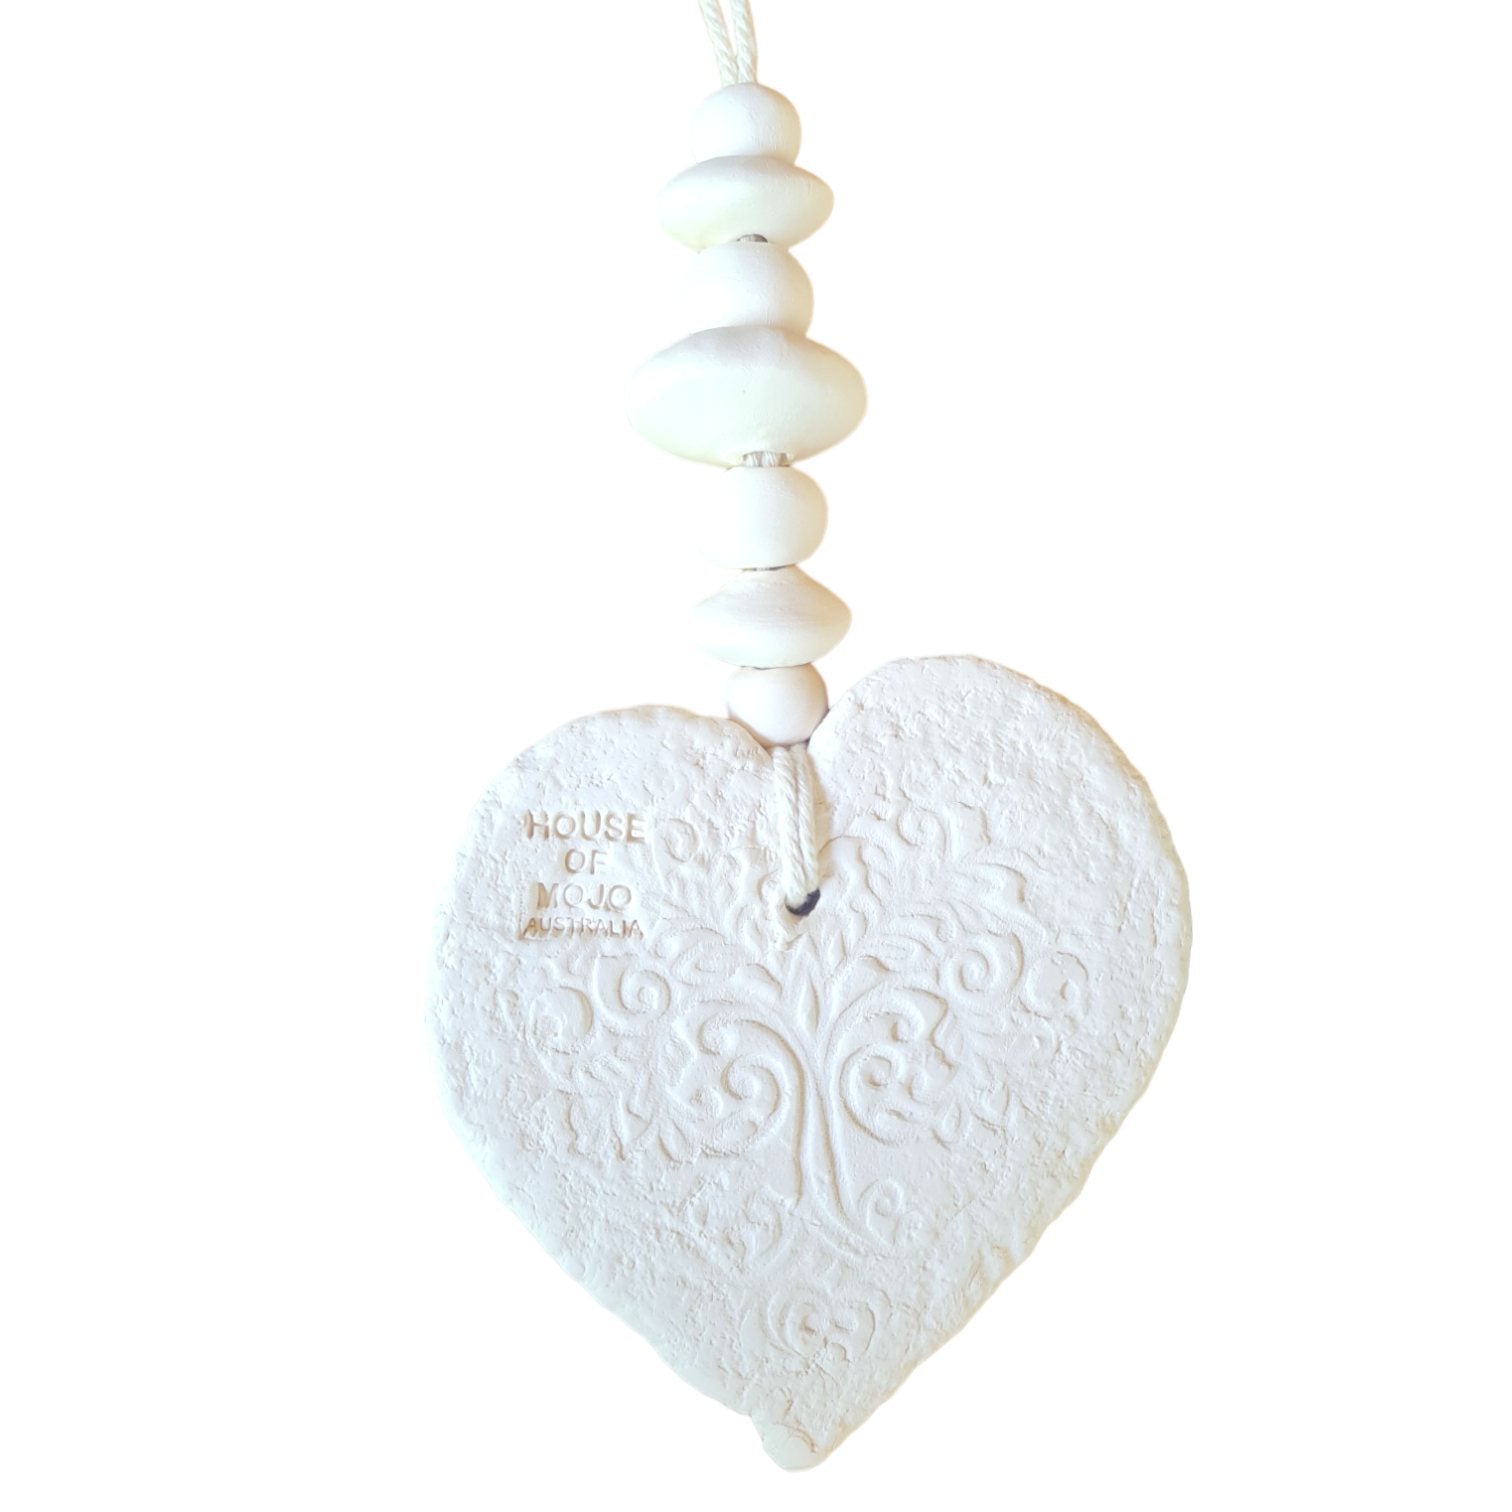 Fragranced Ceramic Hearts - Mojo's Fragranced Ceramic Hearts - Large - "Love You To The Moon And Back"